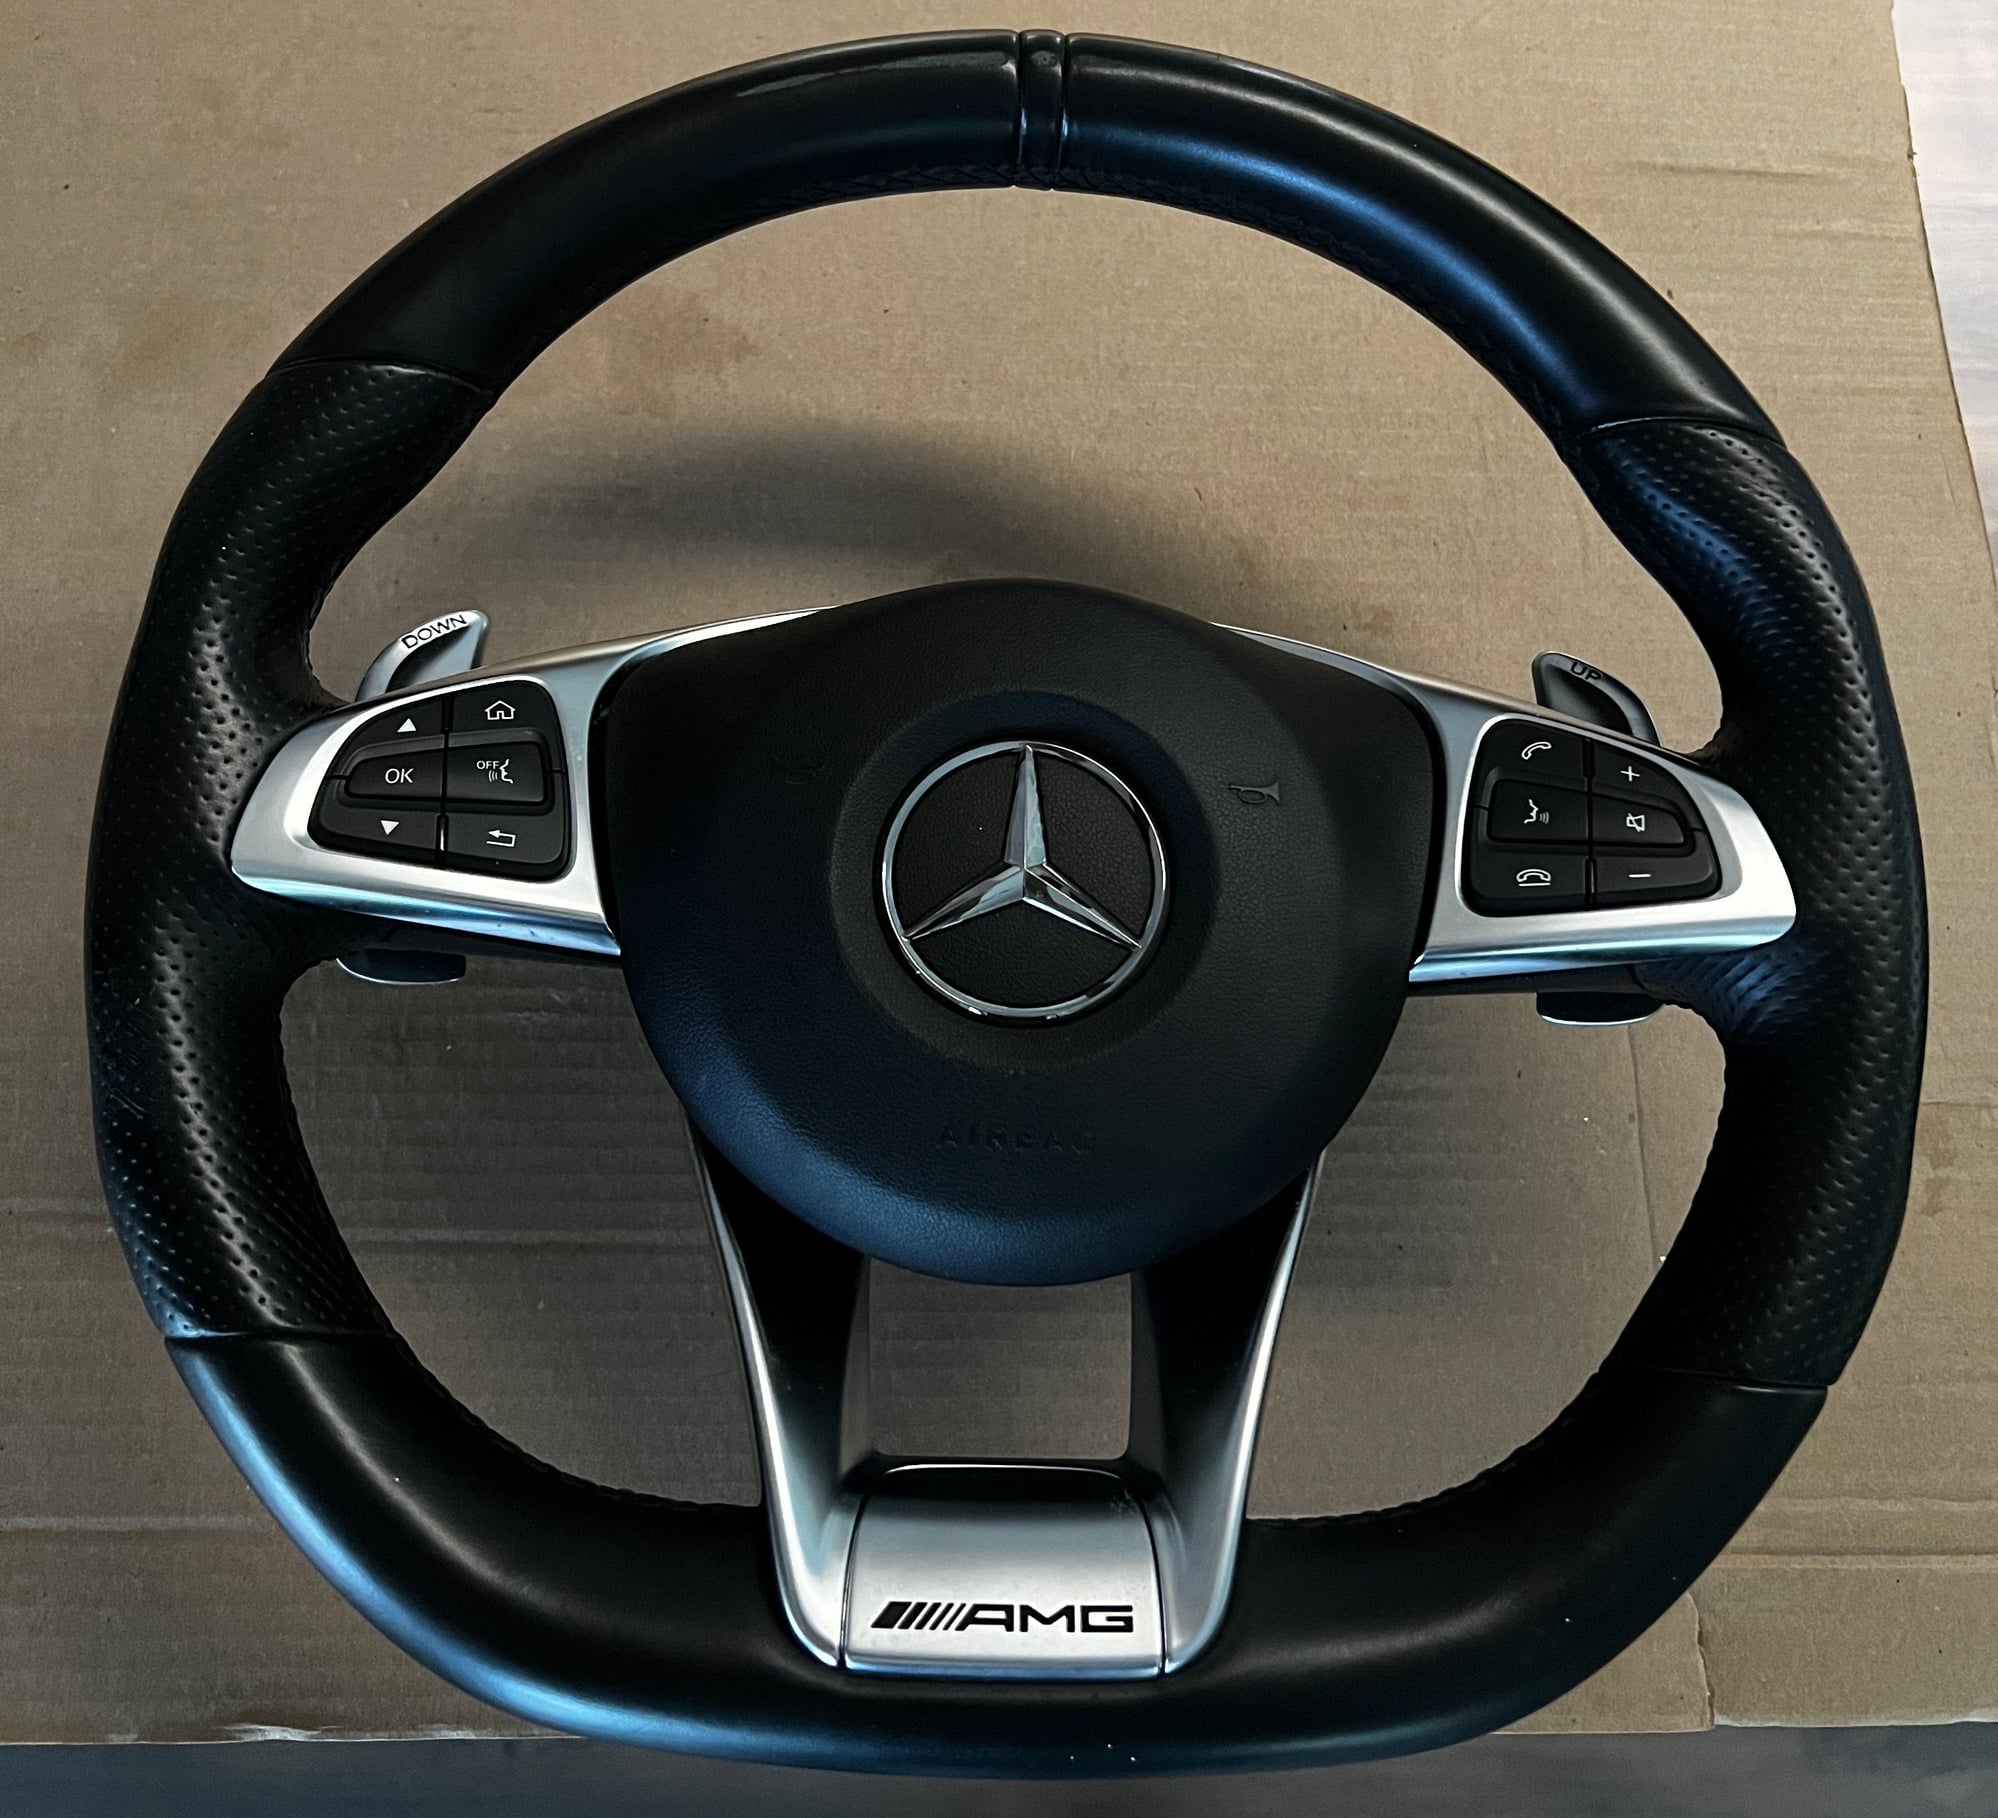 Steering/Suspension - 2017 AMG GT OEM Steering Wheel for sale - Used - 2016 to 2018 Mercedes-Benz AMG GT - Pompano Beach, FL 33069, United States